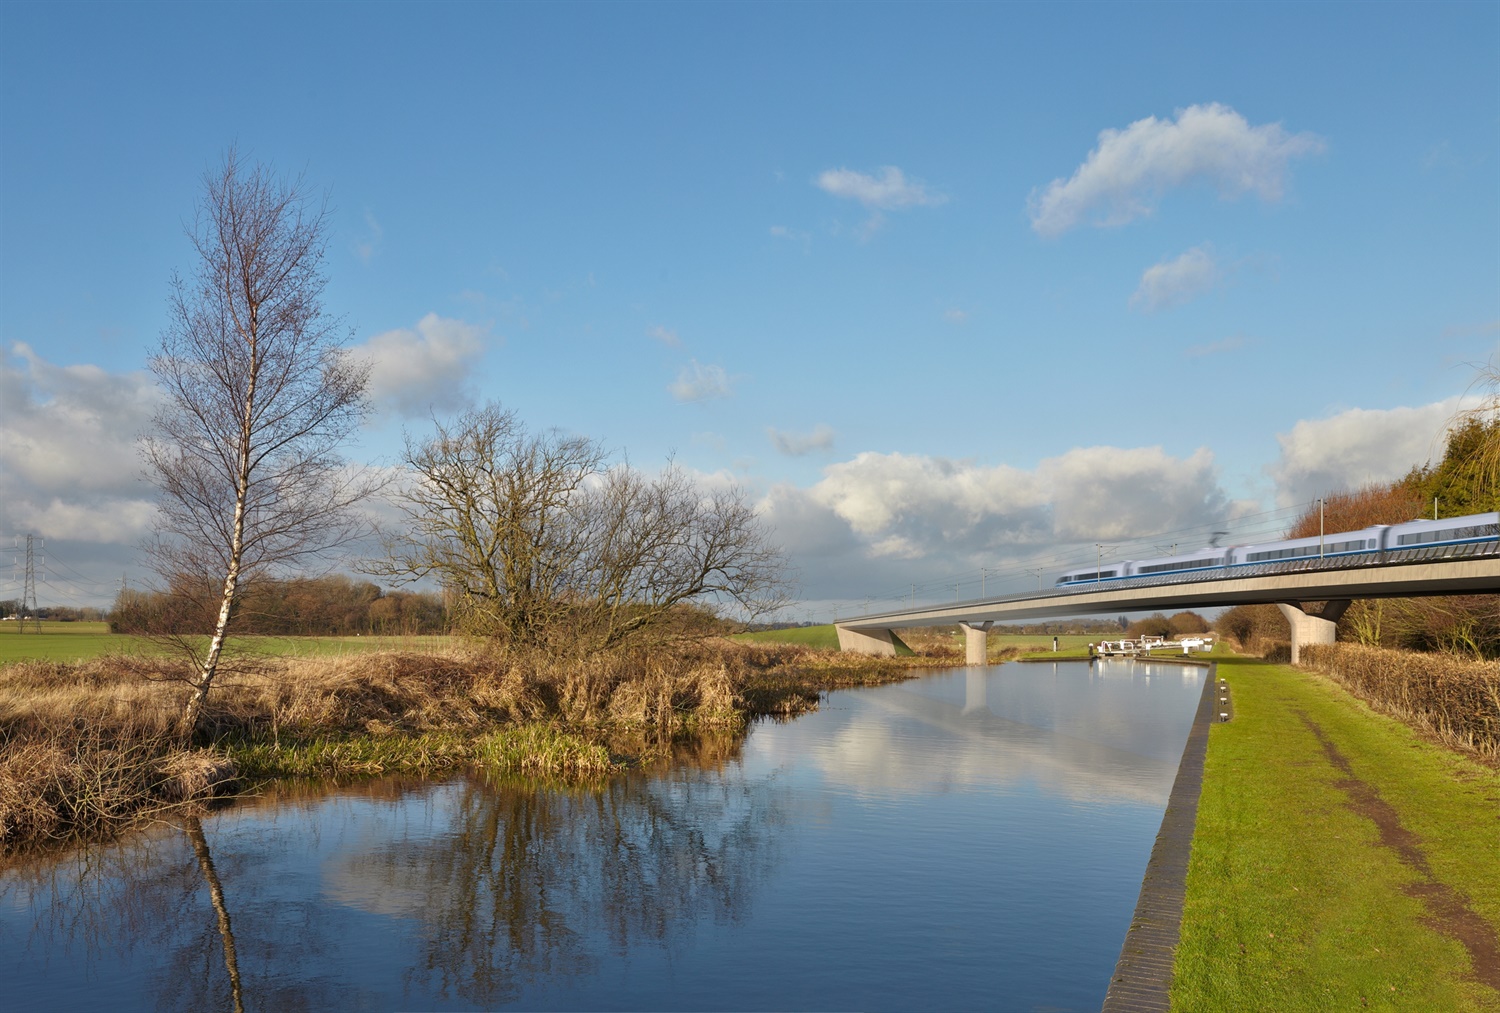 HS2 seeking partners for phase 2 contracts worth over £500m